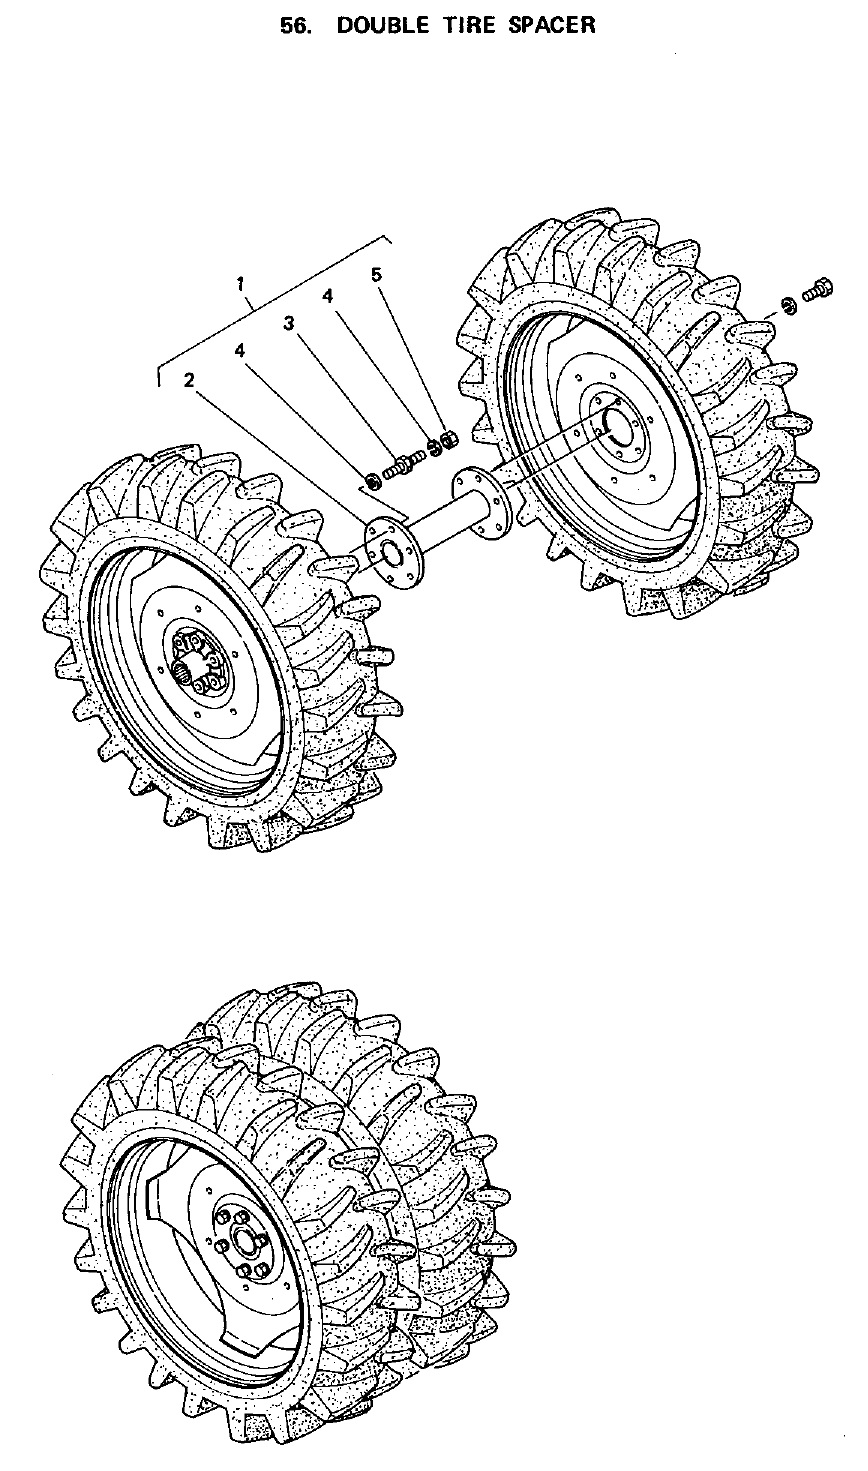 double-stacked-wheels-01.jpg